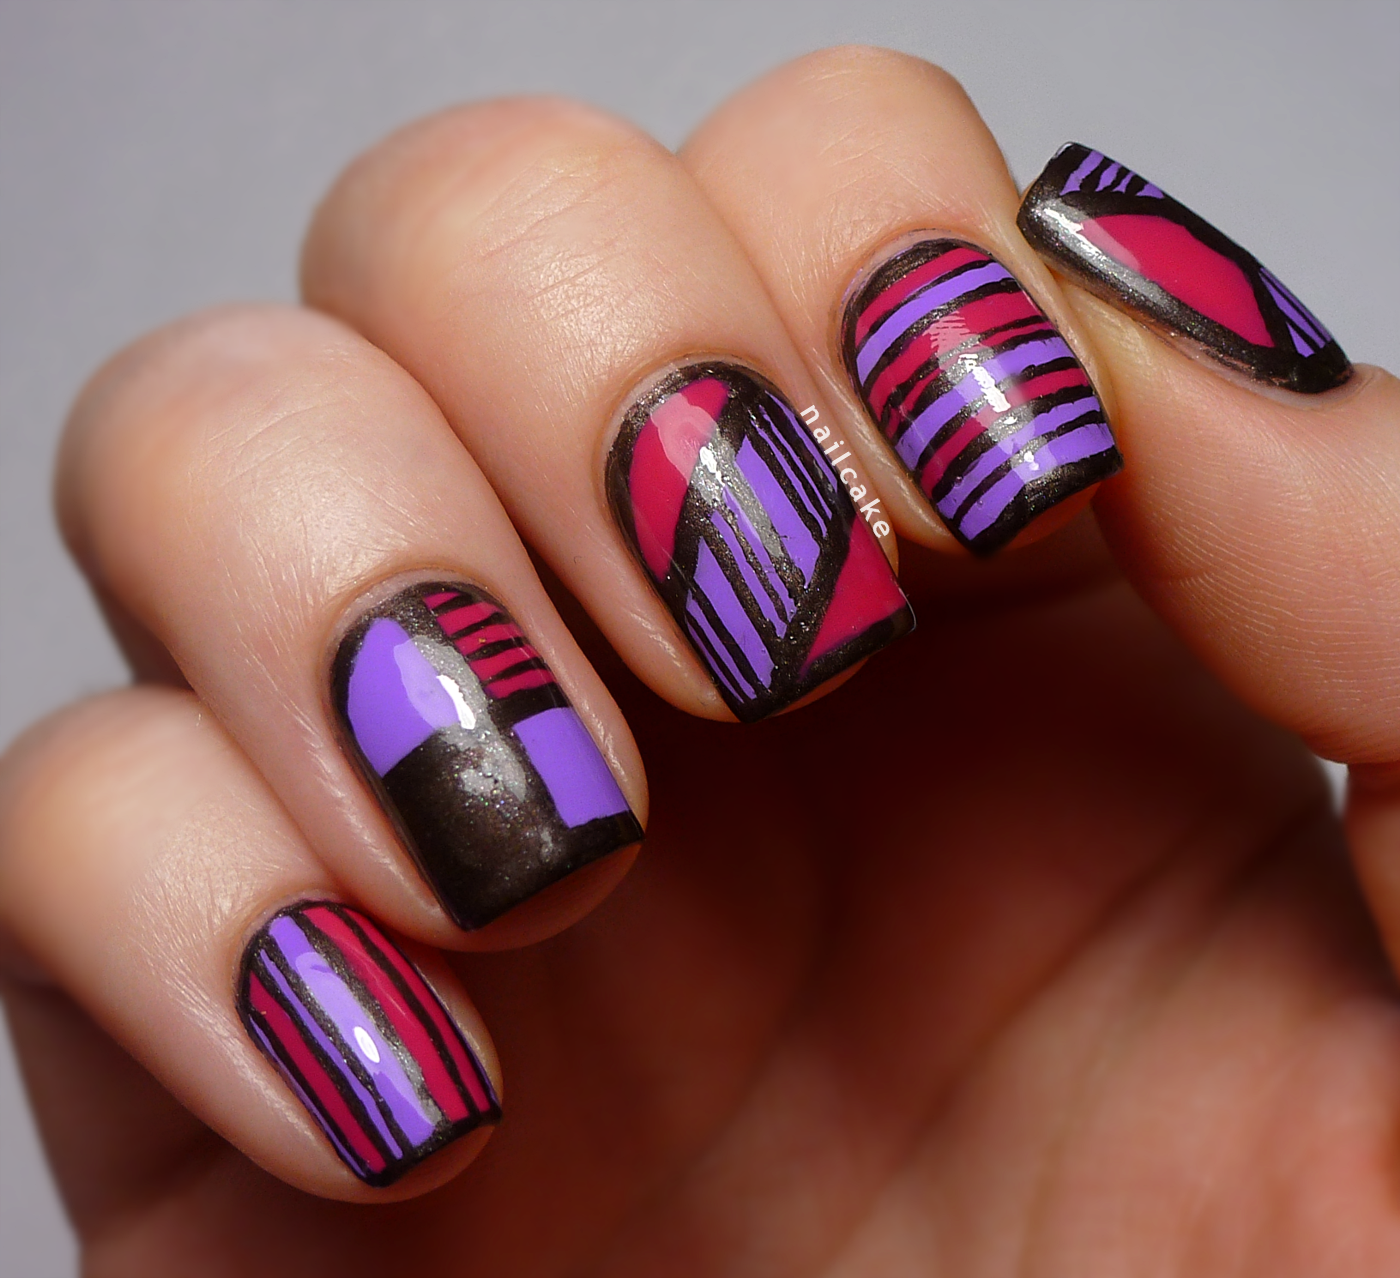 Nail Design With Lines For this design, including my